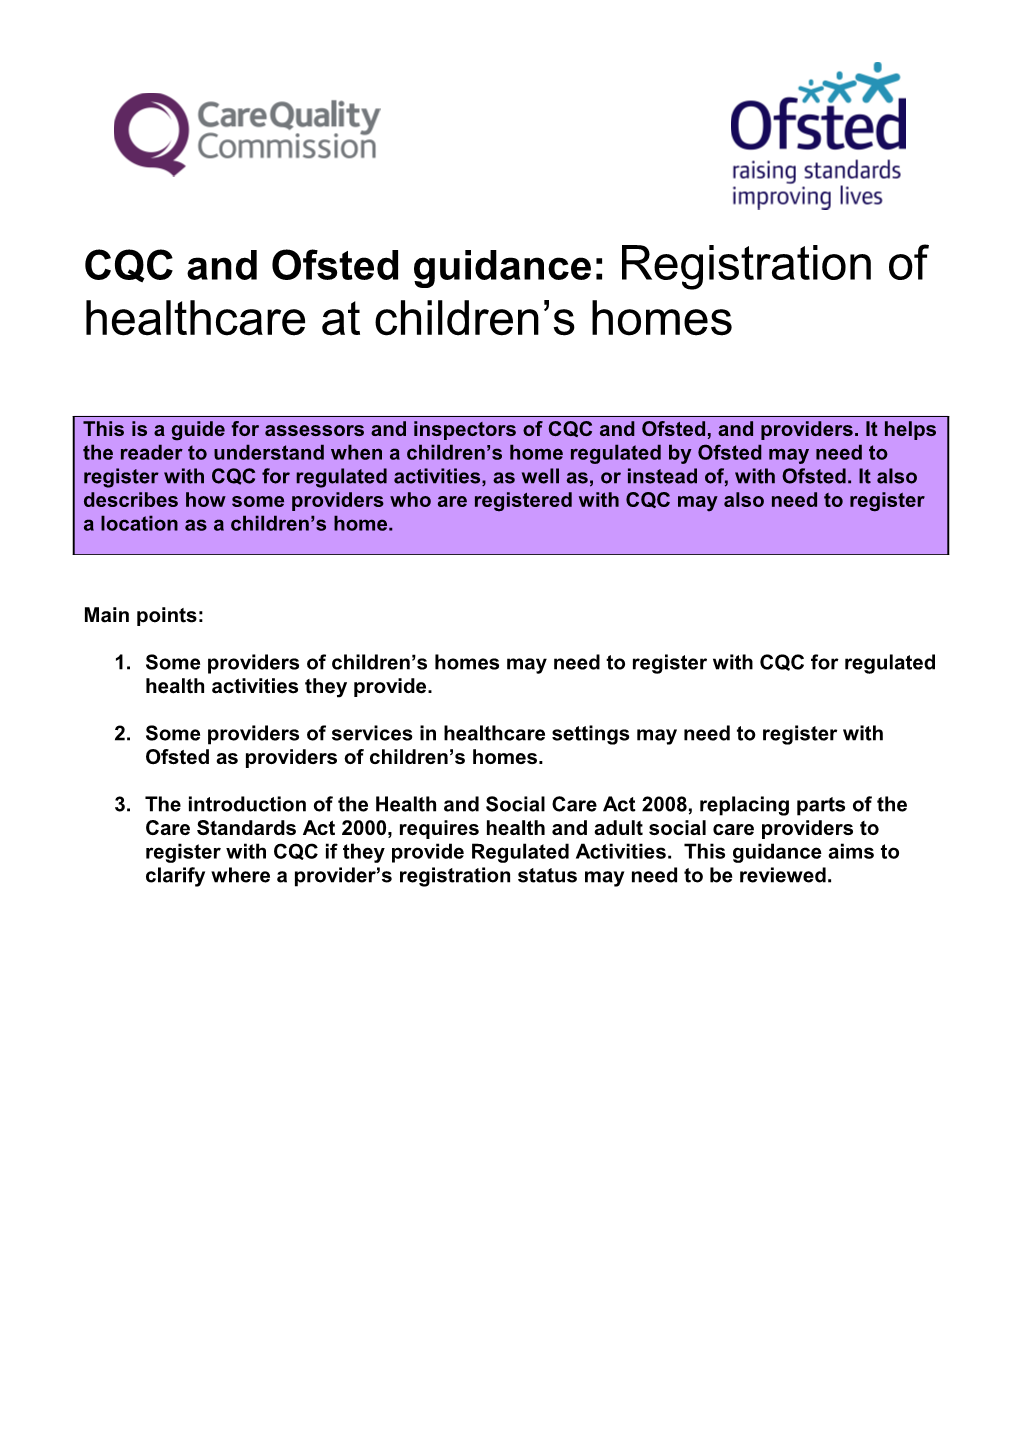 CQC and Ofsted Guidance: Registration of Healthcare at Children S Homes